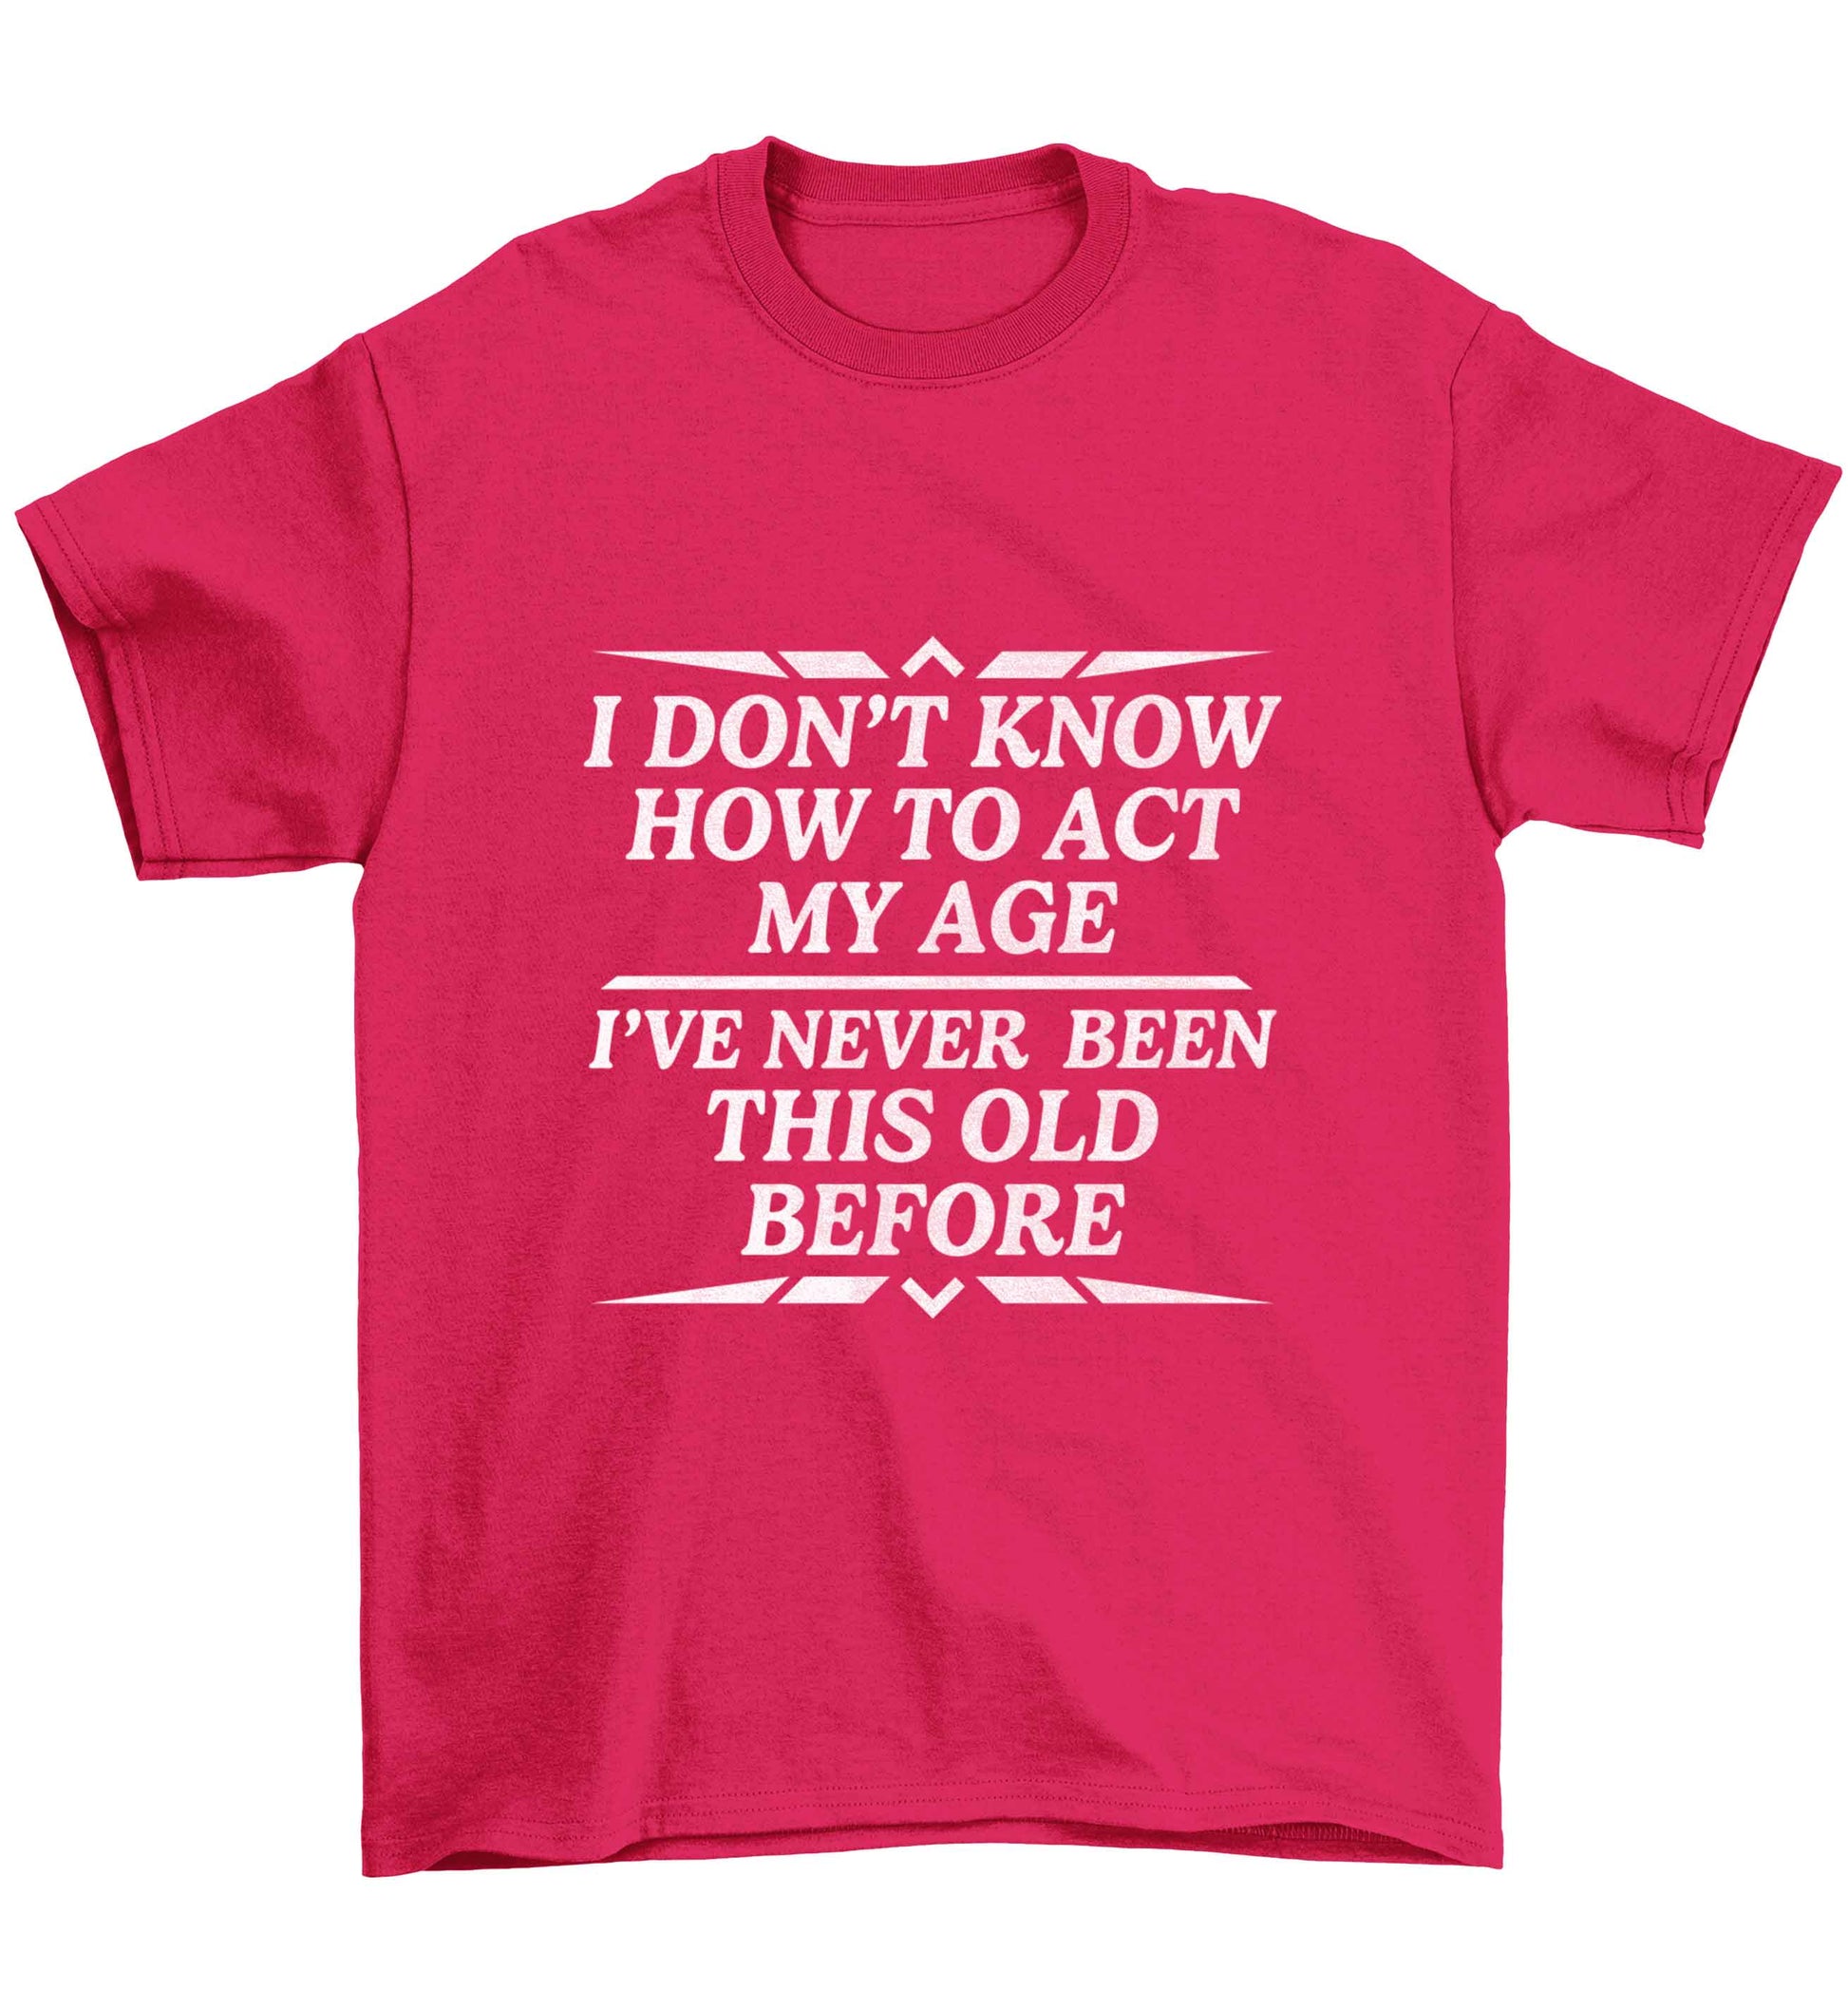 I don't know how to act my age I've never been this old before Children's pink Tshirt 12-13 Years